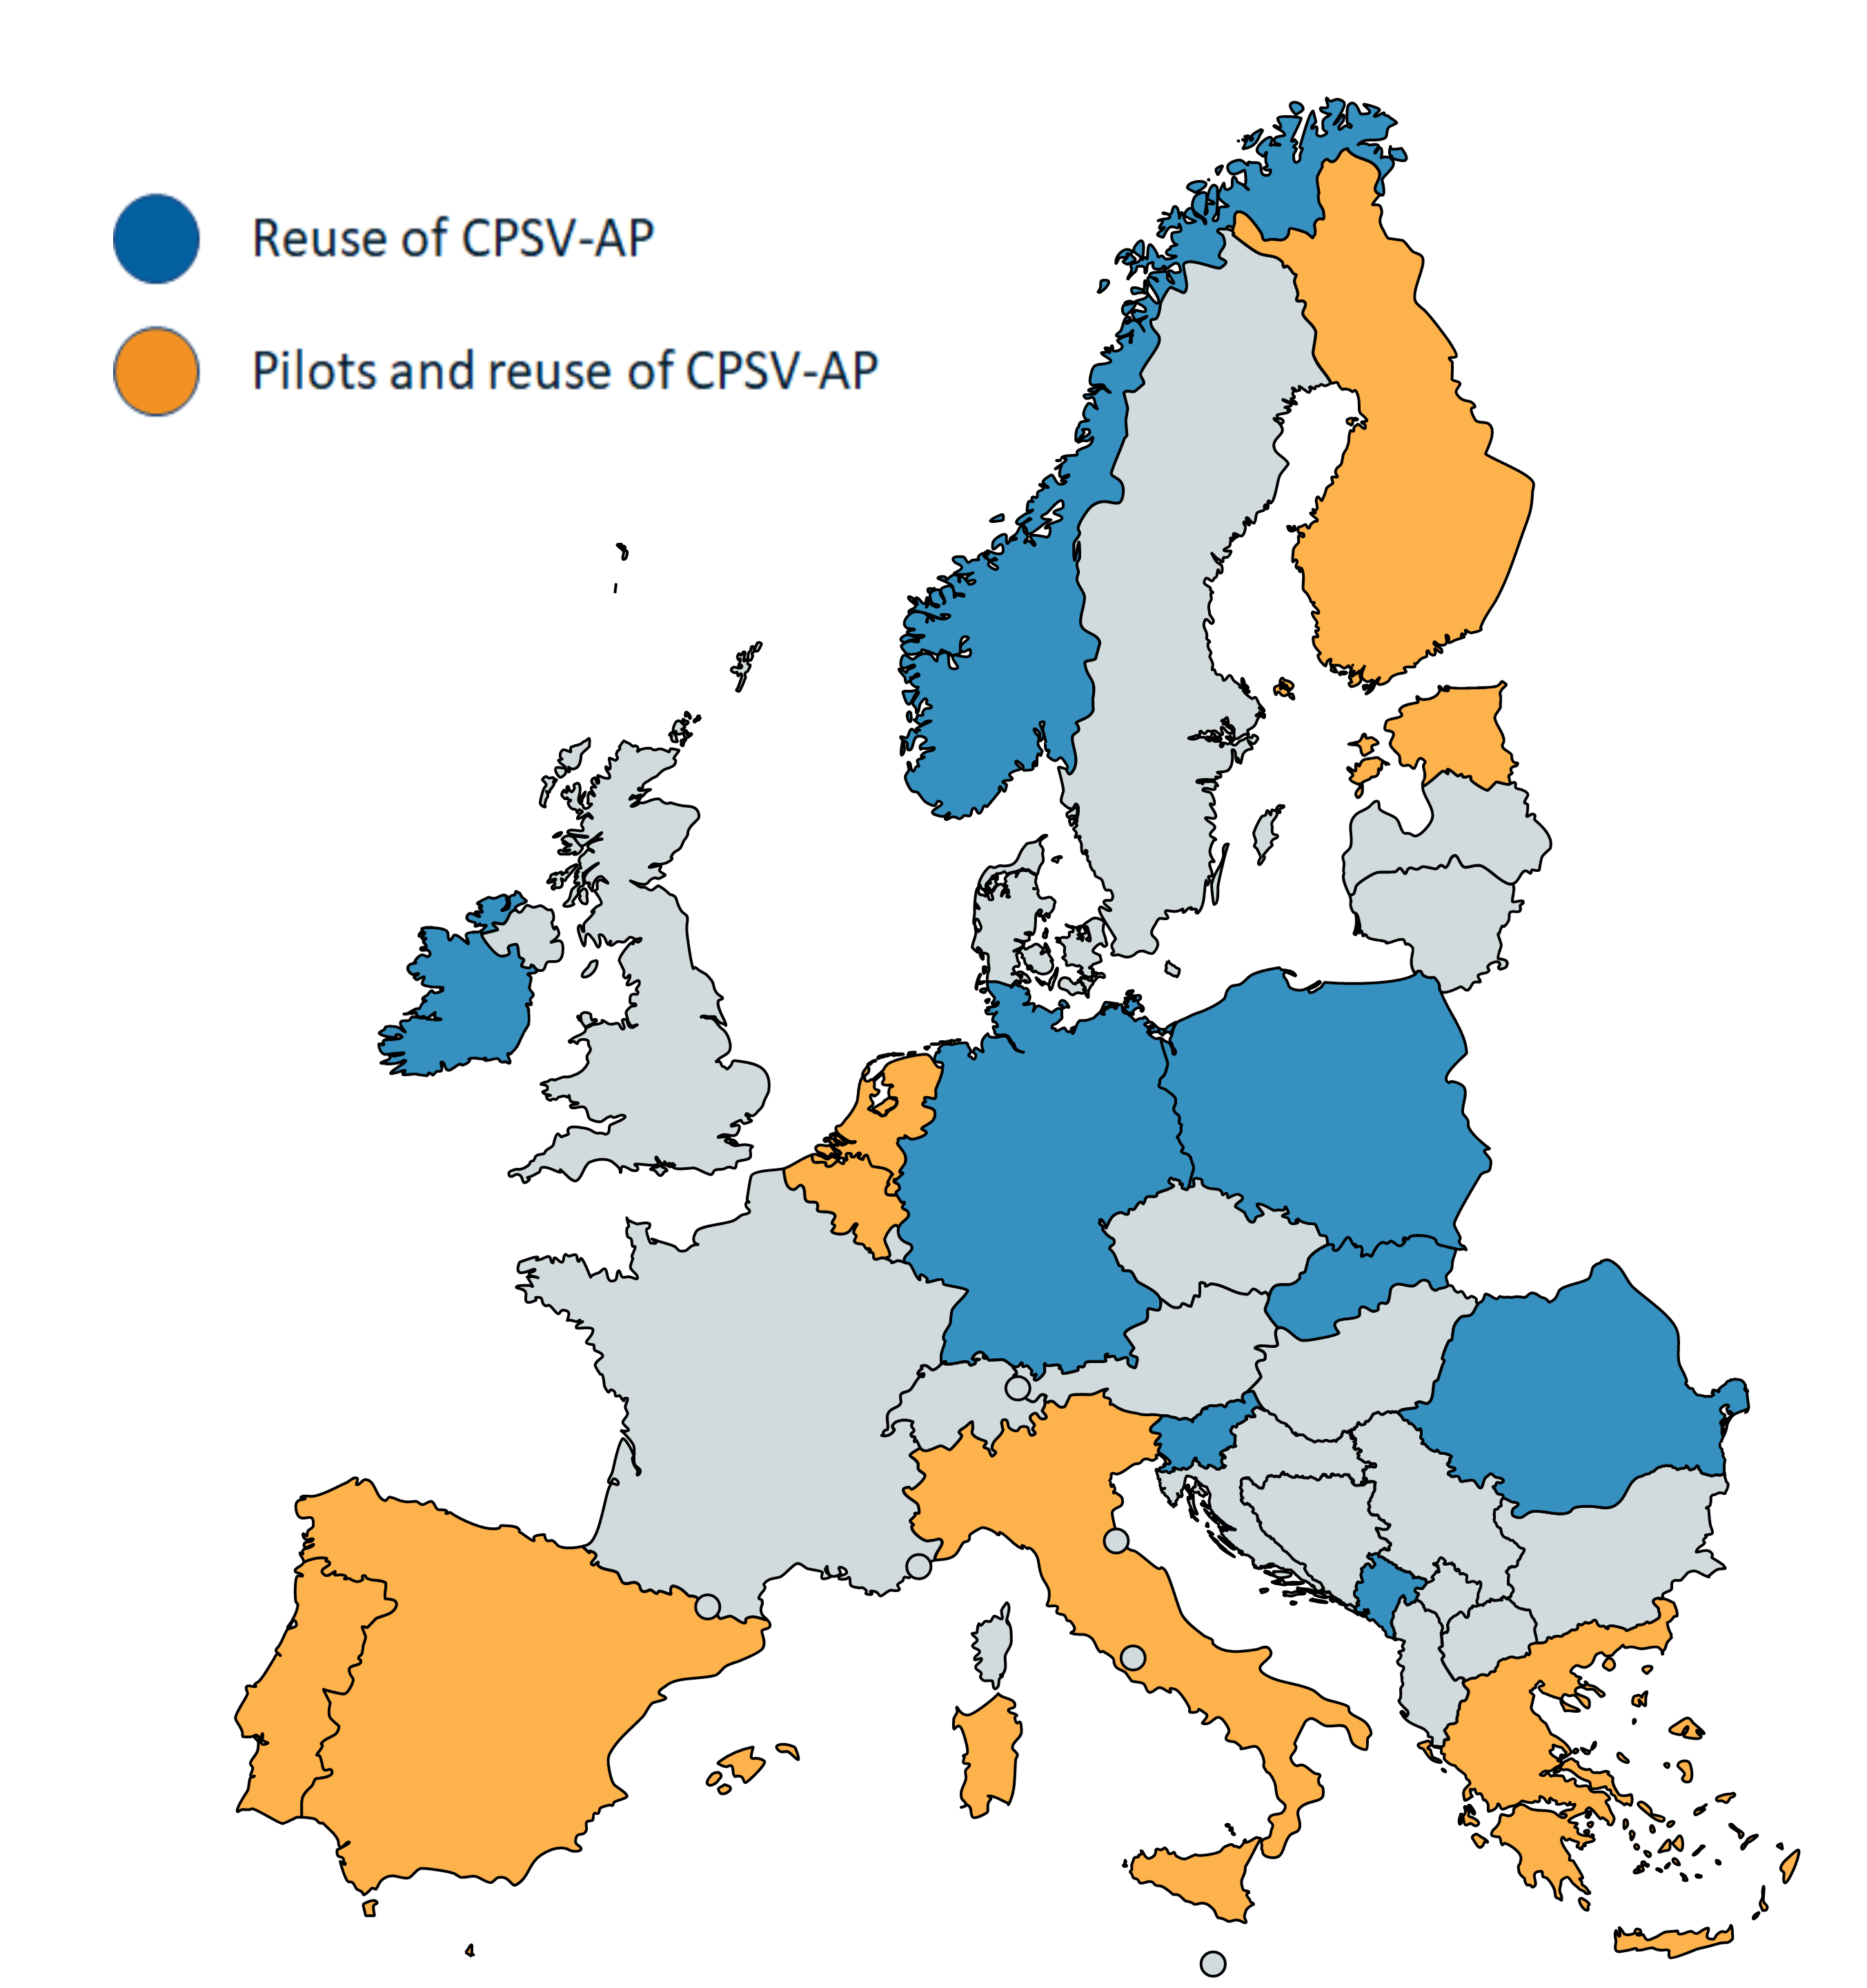 Map of Europe displaying the reuse and piloting activities of CPSV-AP